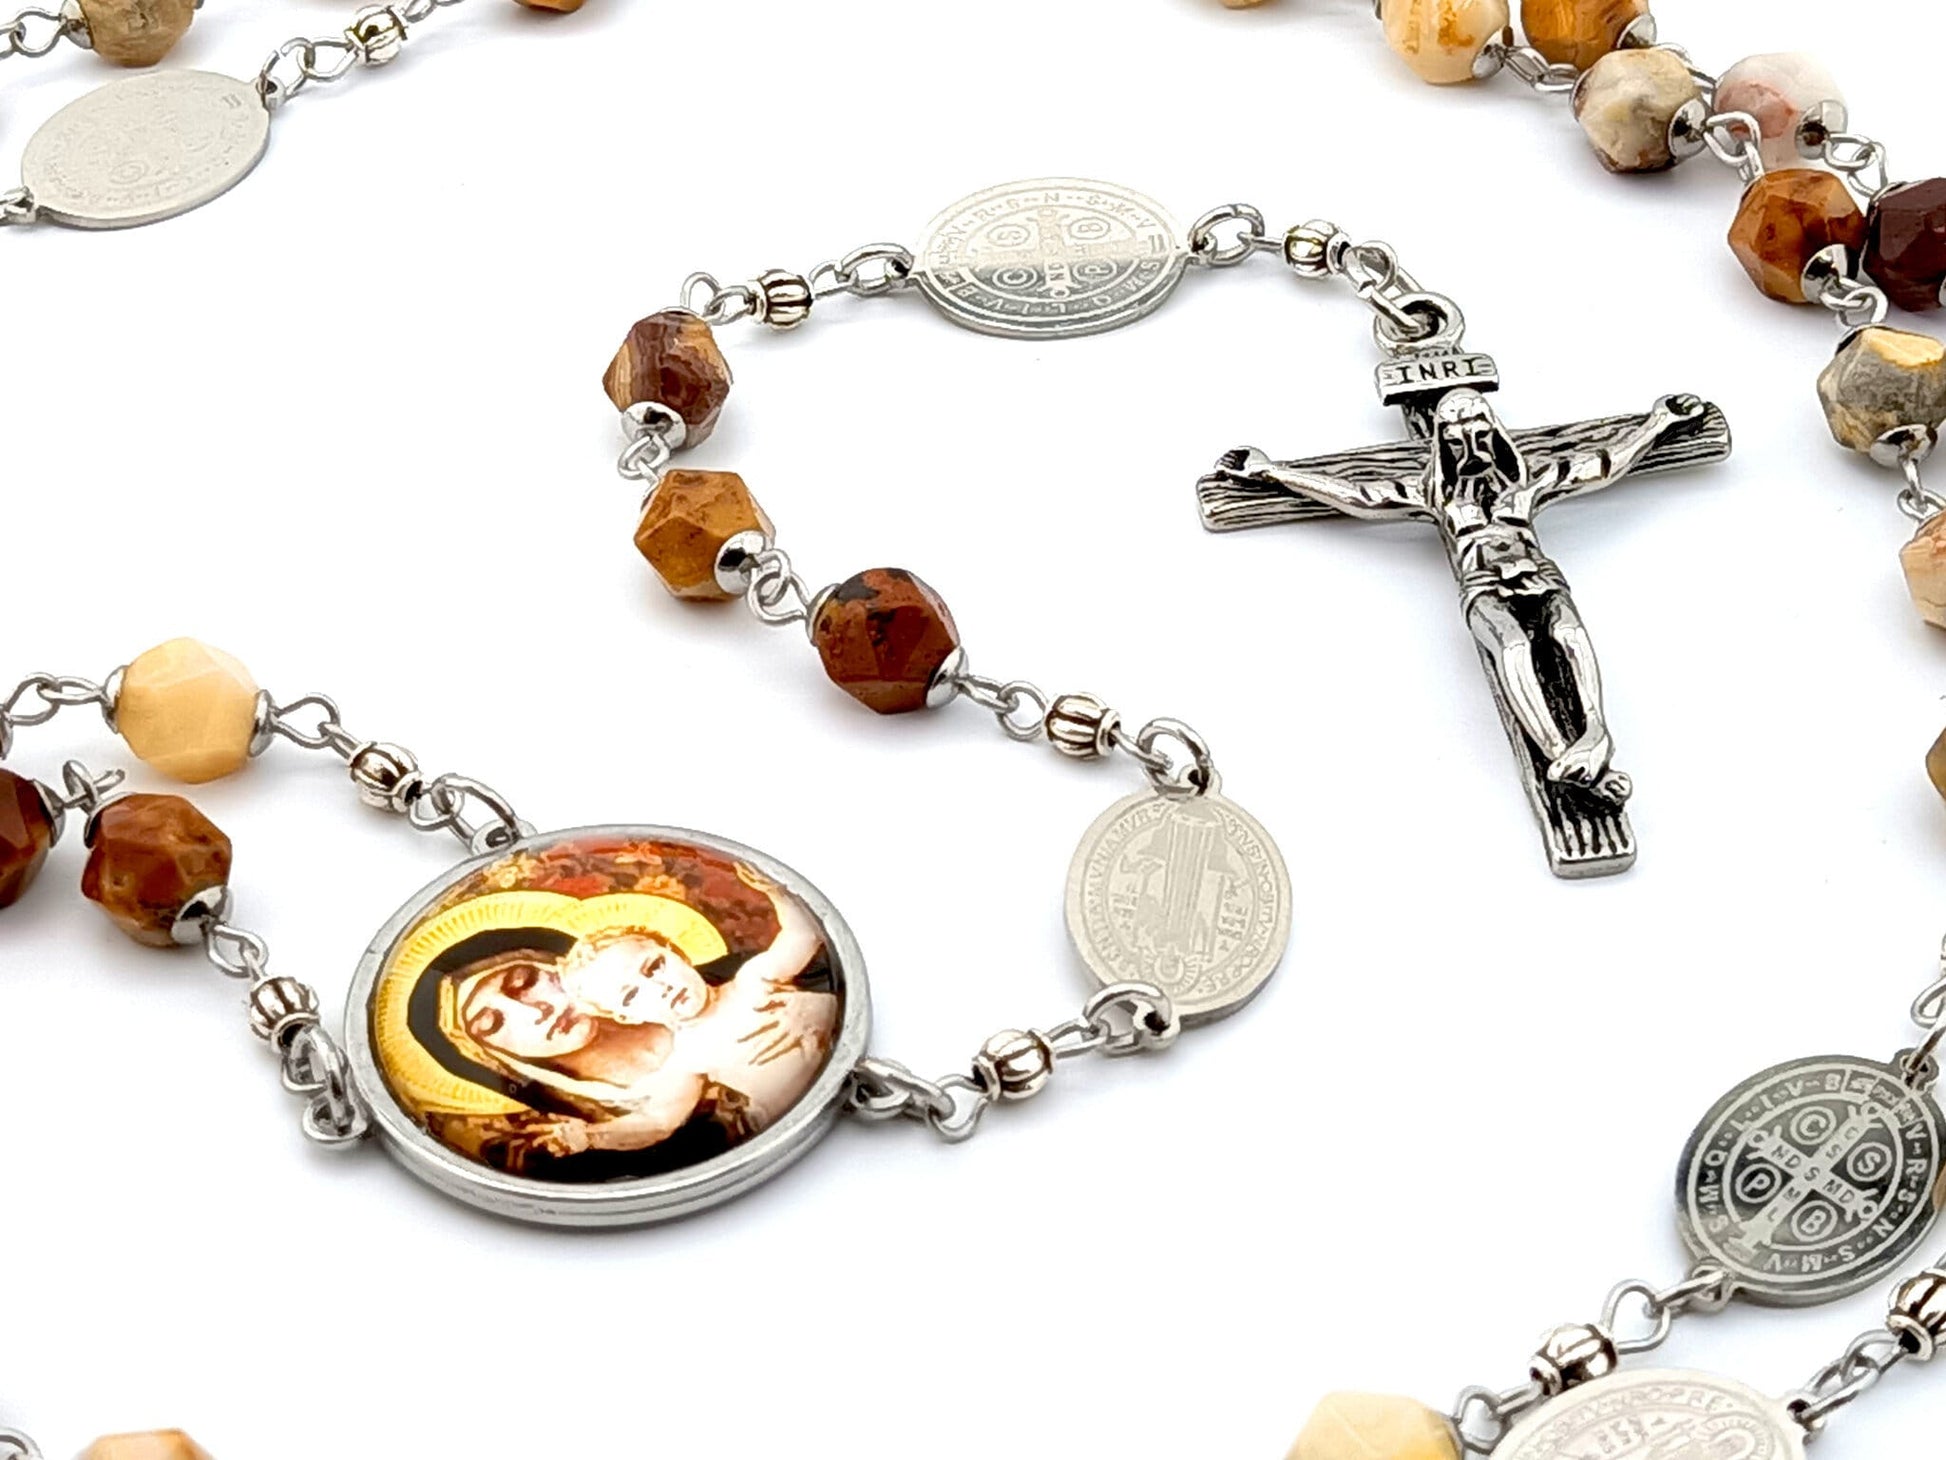 Our Lady of Laus unique rosary beads with natural faceted gemstone and stainless steel etched beads, stainless steel crucifix and picture centre medal.